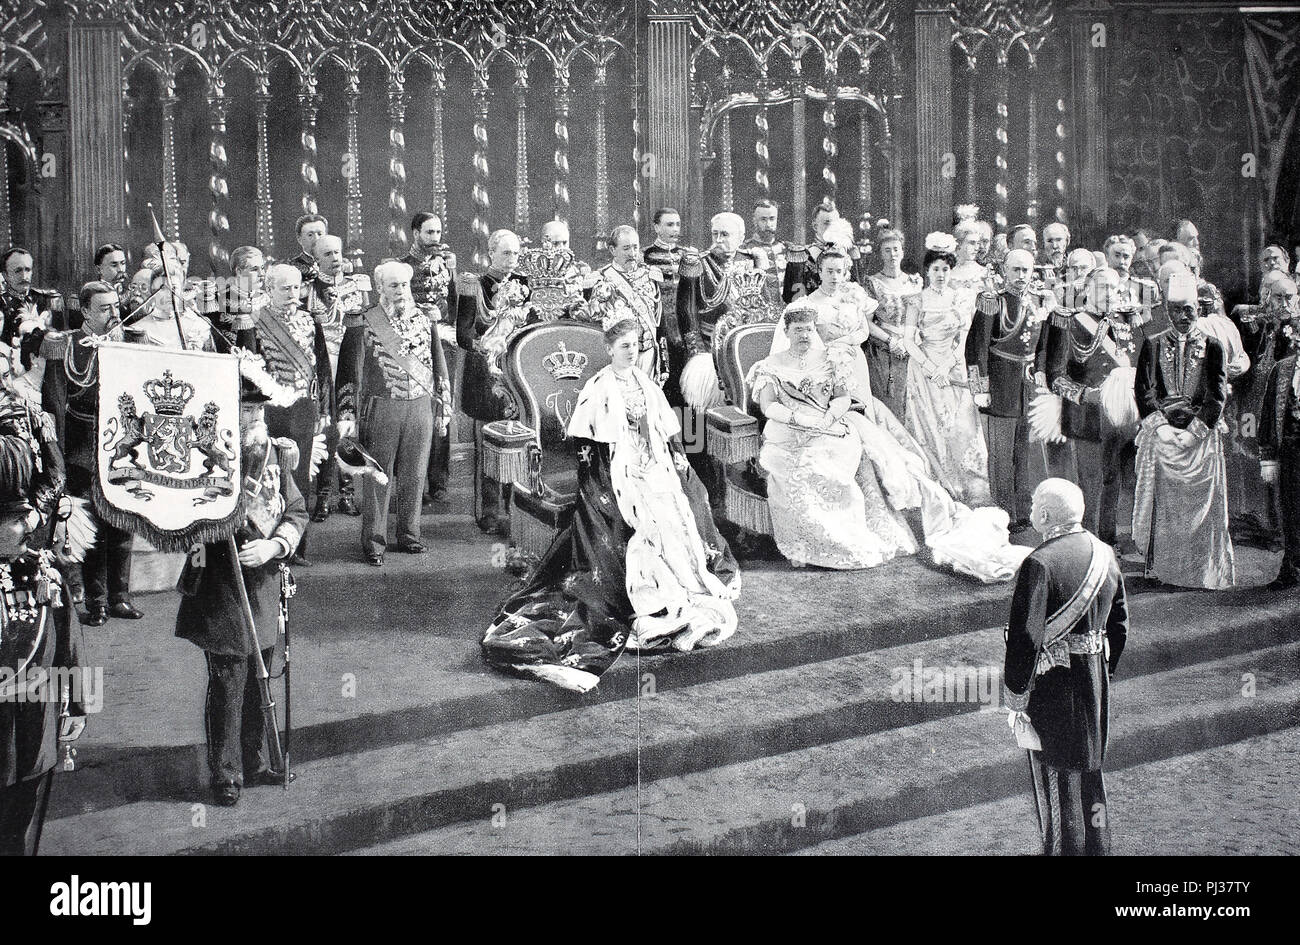 Wilhelmina, Queen of the Netherlands, receives the tribute from the People's Representative, July 5, 1898, digital improved reproduction of an original from the year 1895 Stock Photo